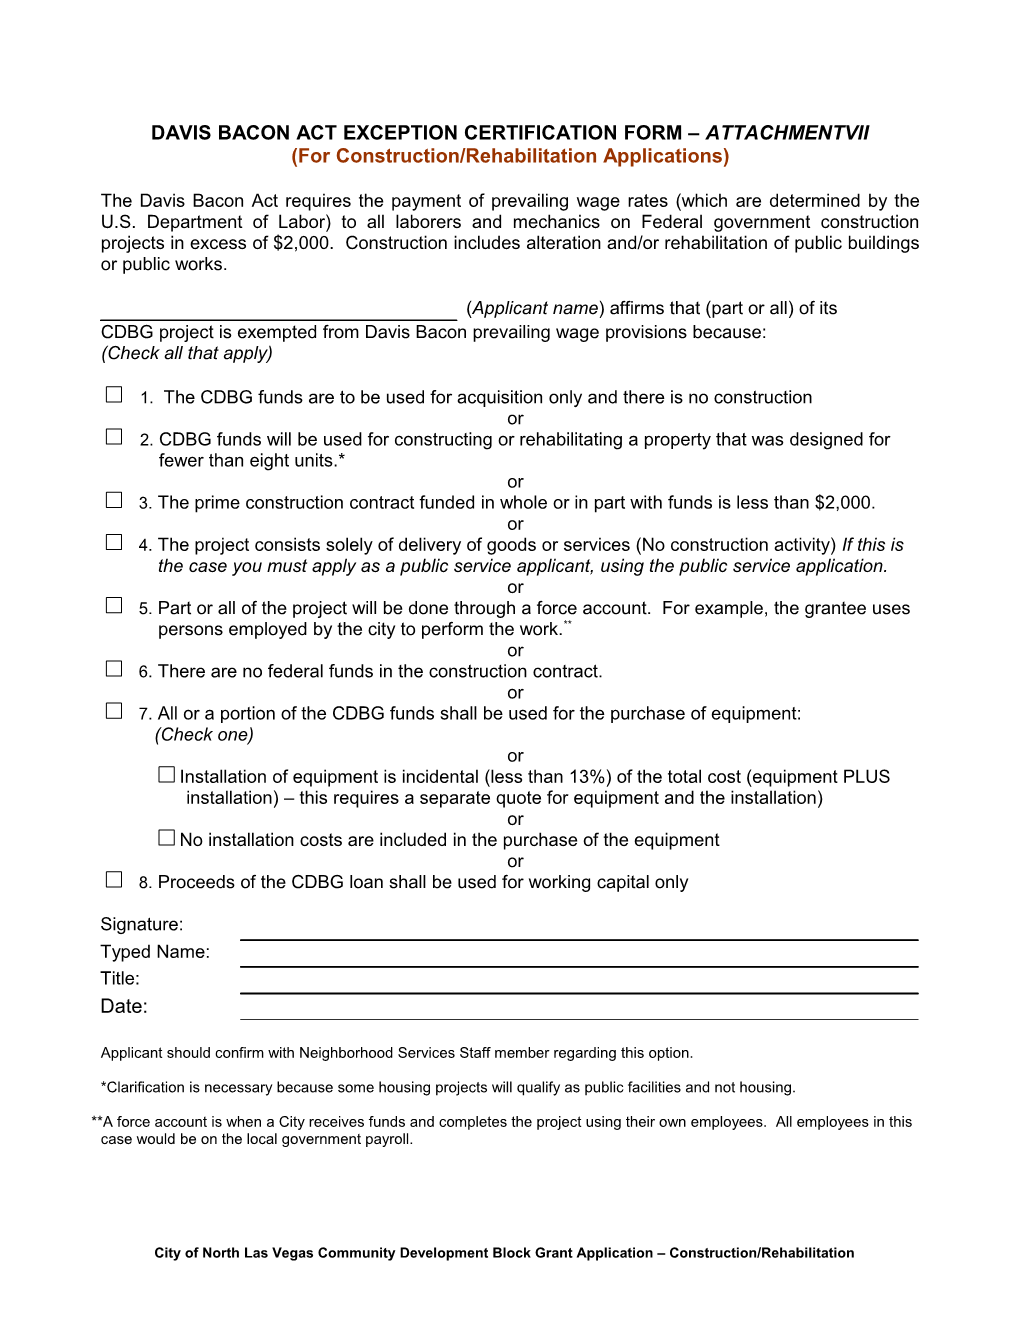 Davis Bacon Act Exception Certification Form